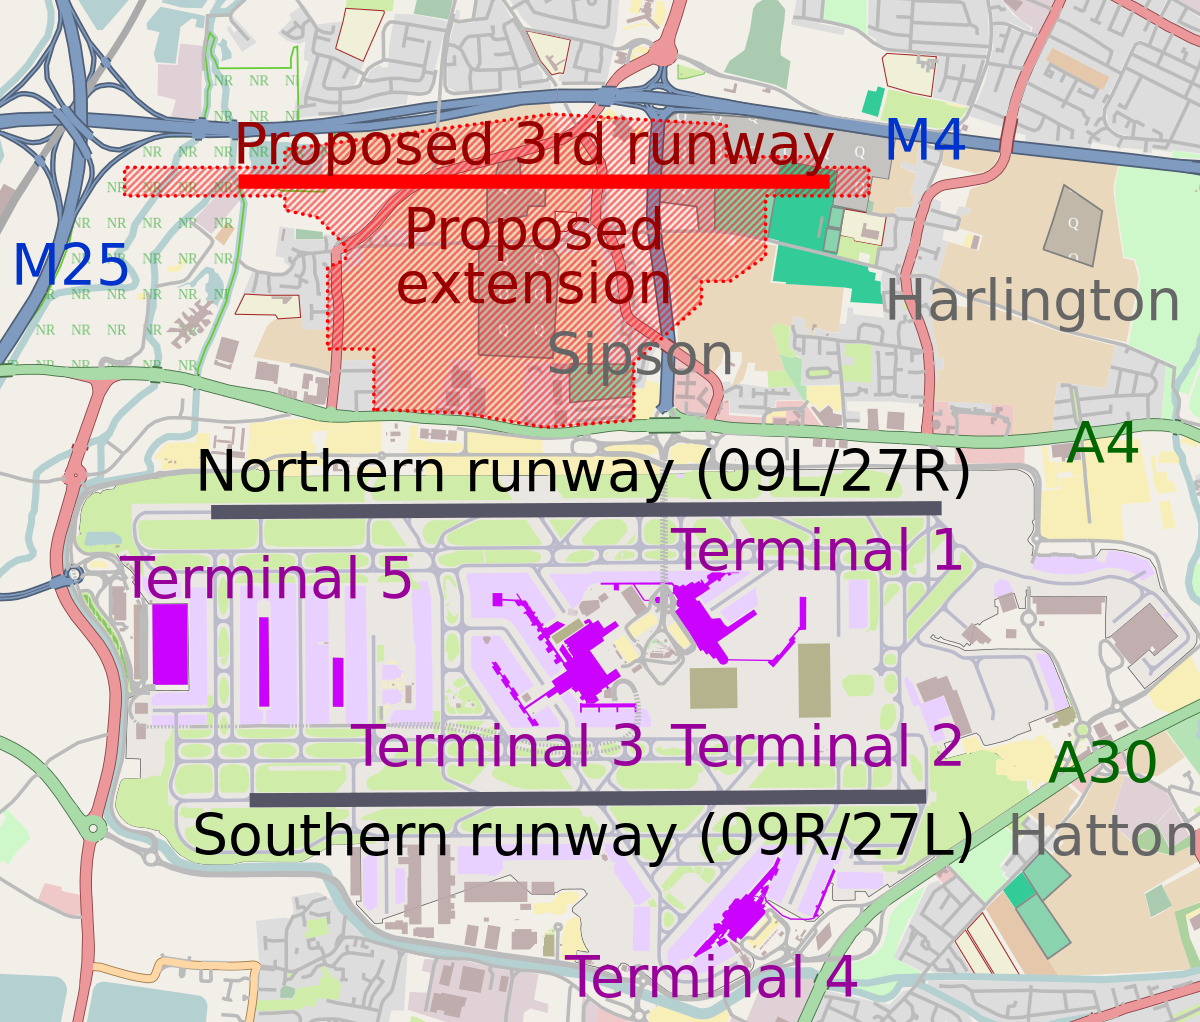 Map Of Heathrow Surrounding Area File:heathrow Airport Map With Third Runway.svg - Wikimedia Commons